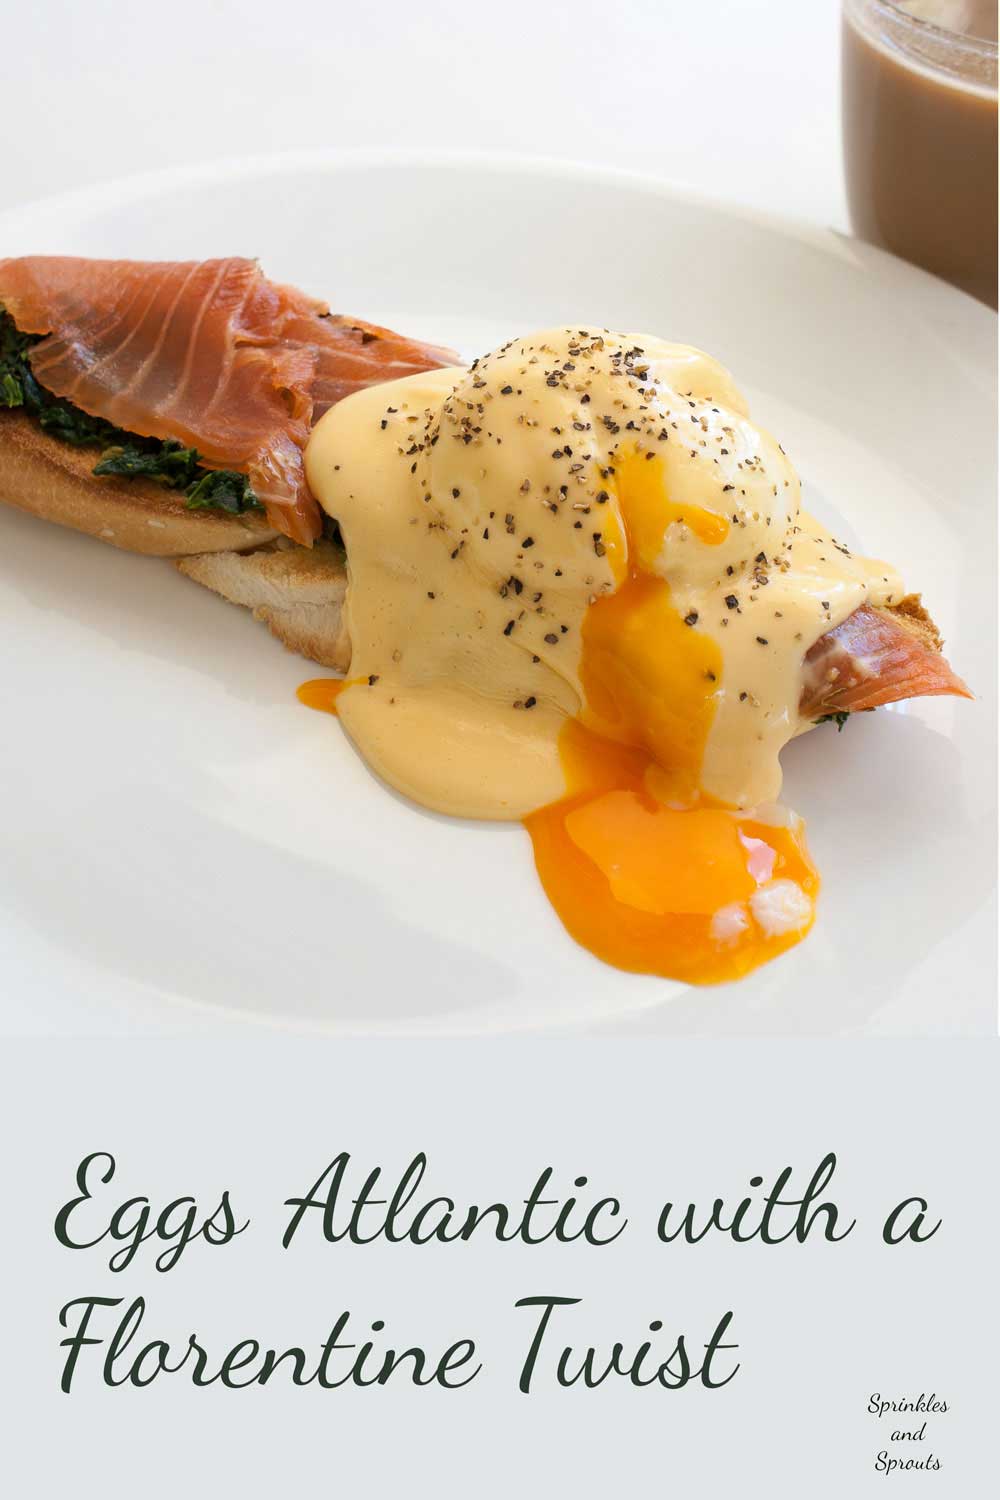 Eggs Atlantic with a Florentine Twist. A softly poached egg with smoked salmon and spinach drizzled in a buttery rich hollandaise sauce.